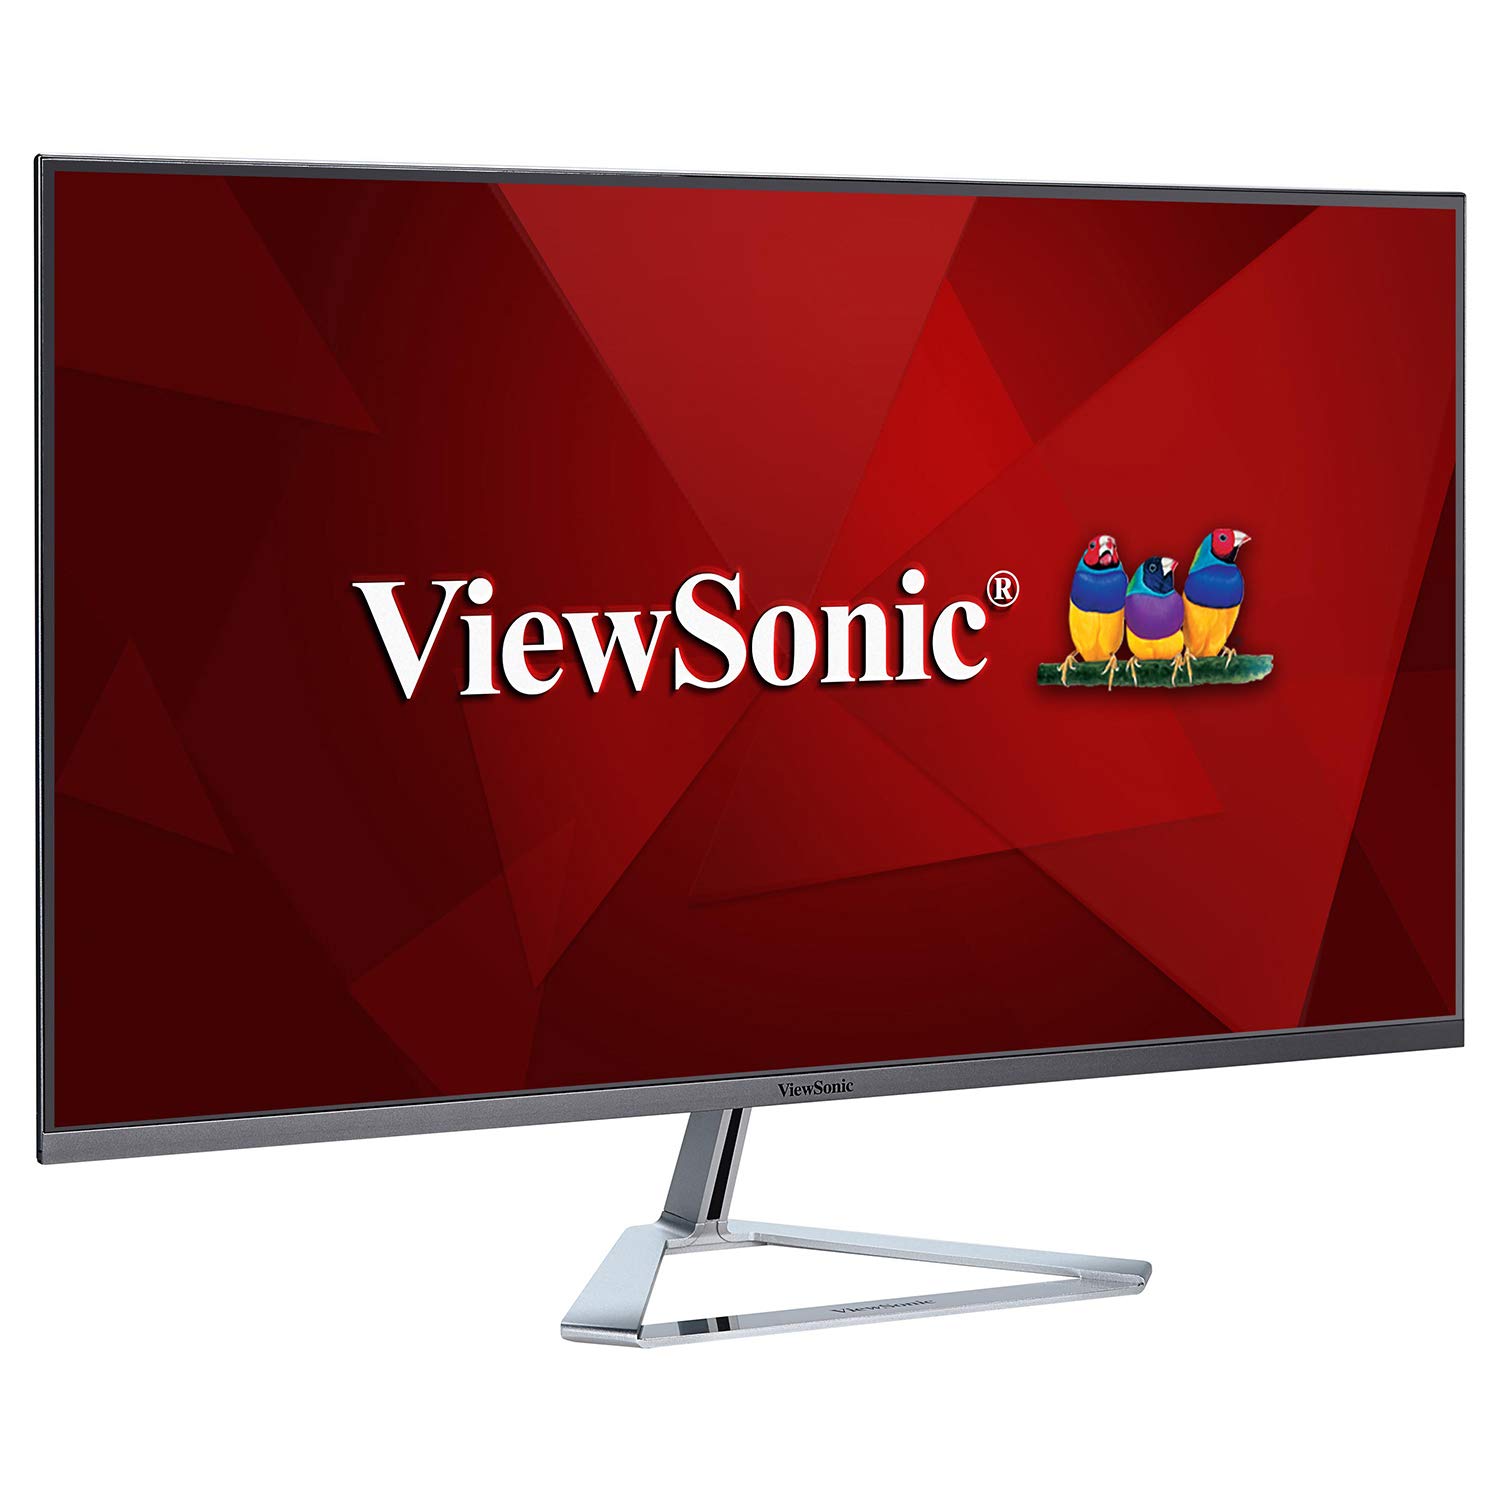 ViewSonic 32 Inch 1080p Widescreen IPS Monitor with Ultra-Thin Bezels, Screen Split Capability HDMI and DisplayPort (VX3276-MHD),blue